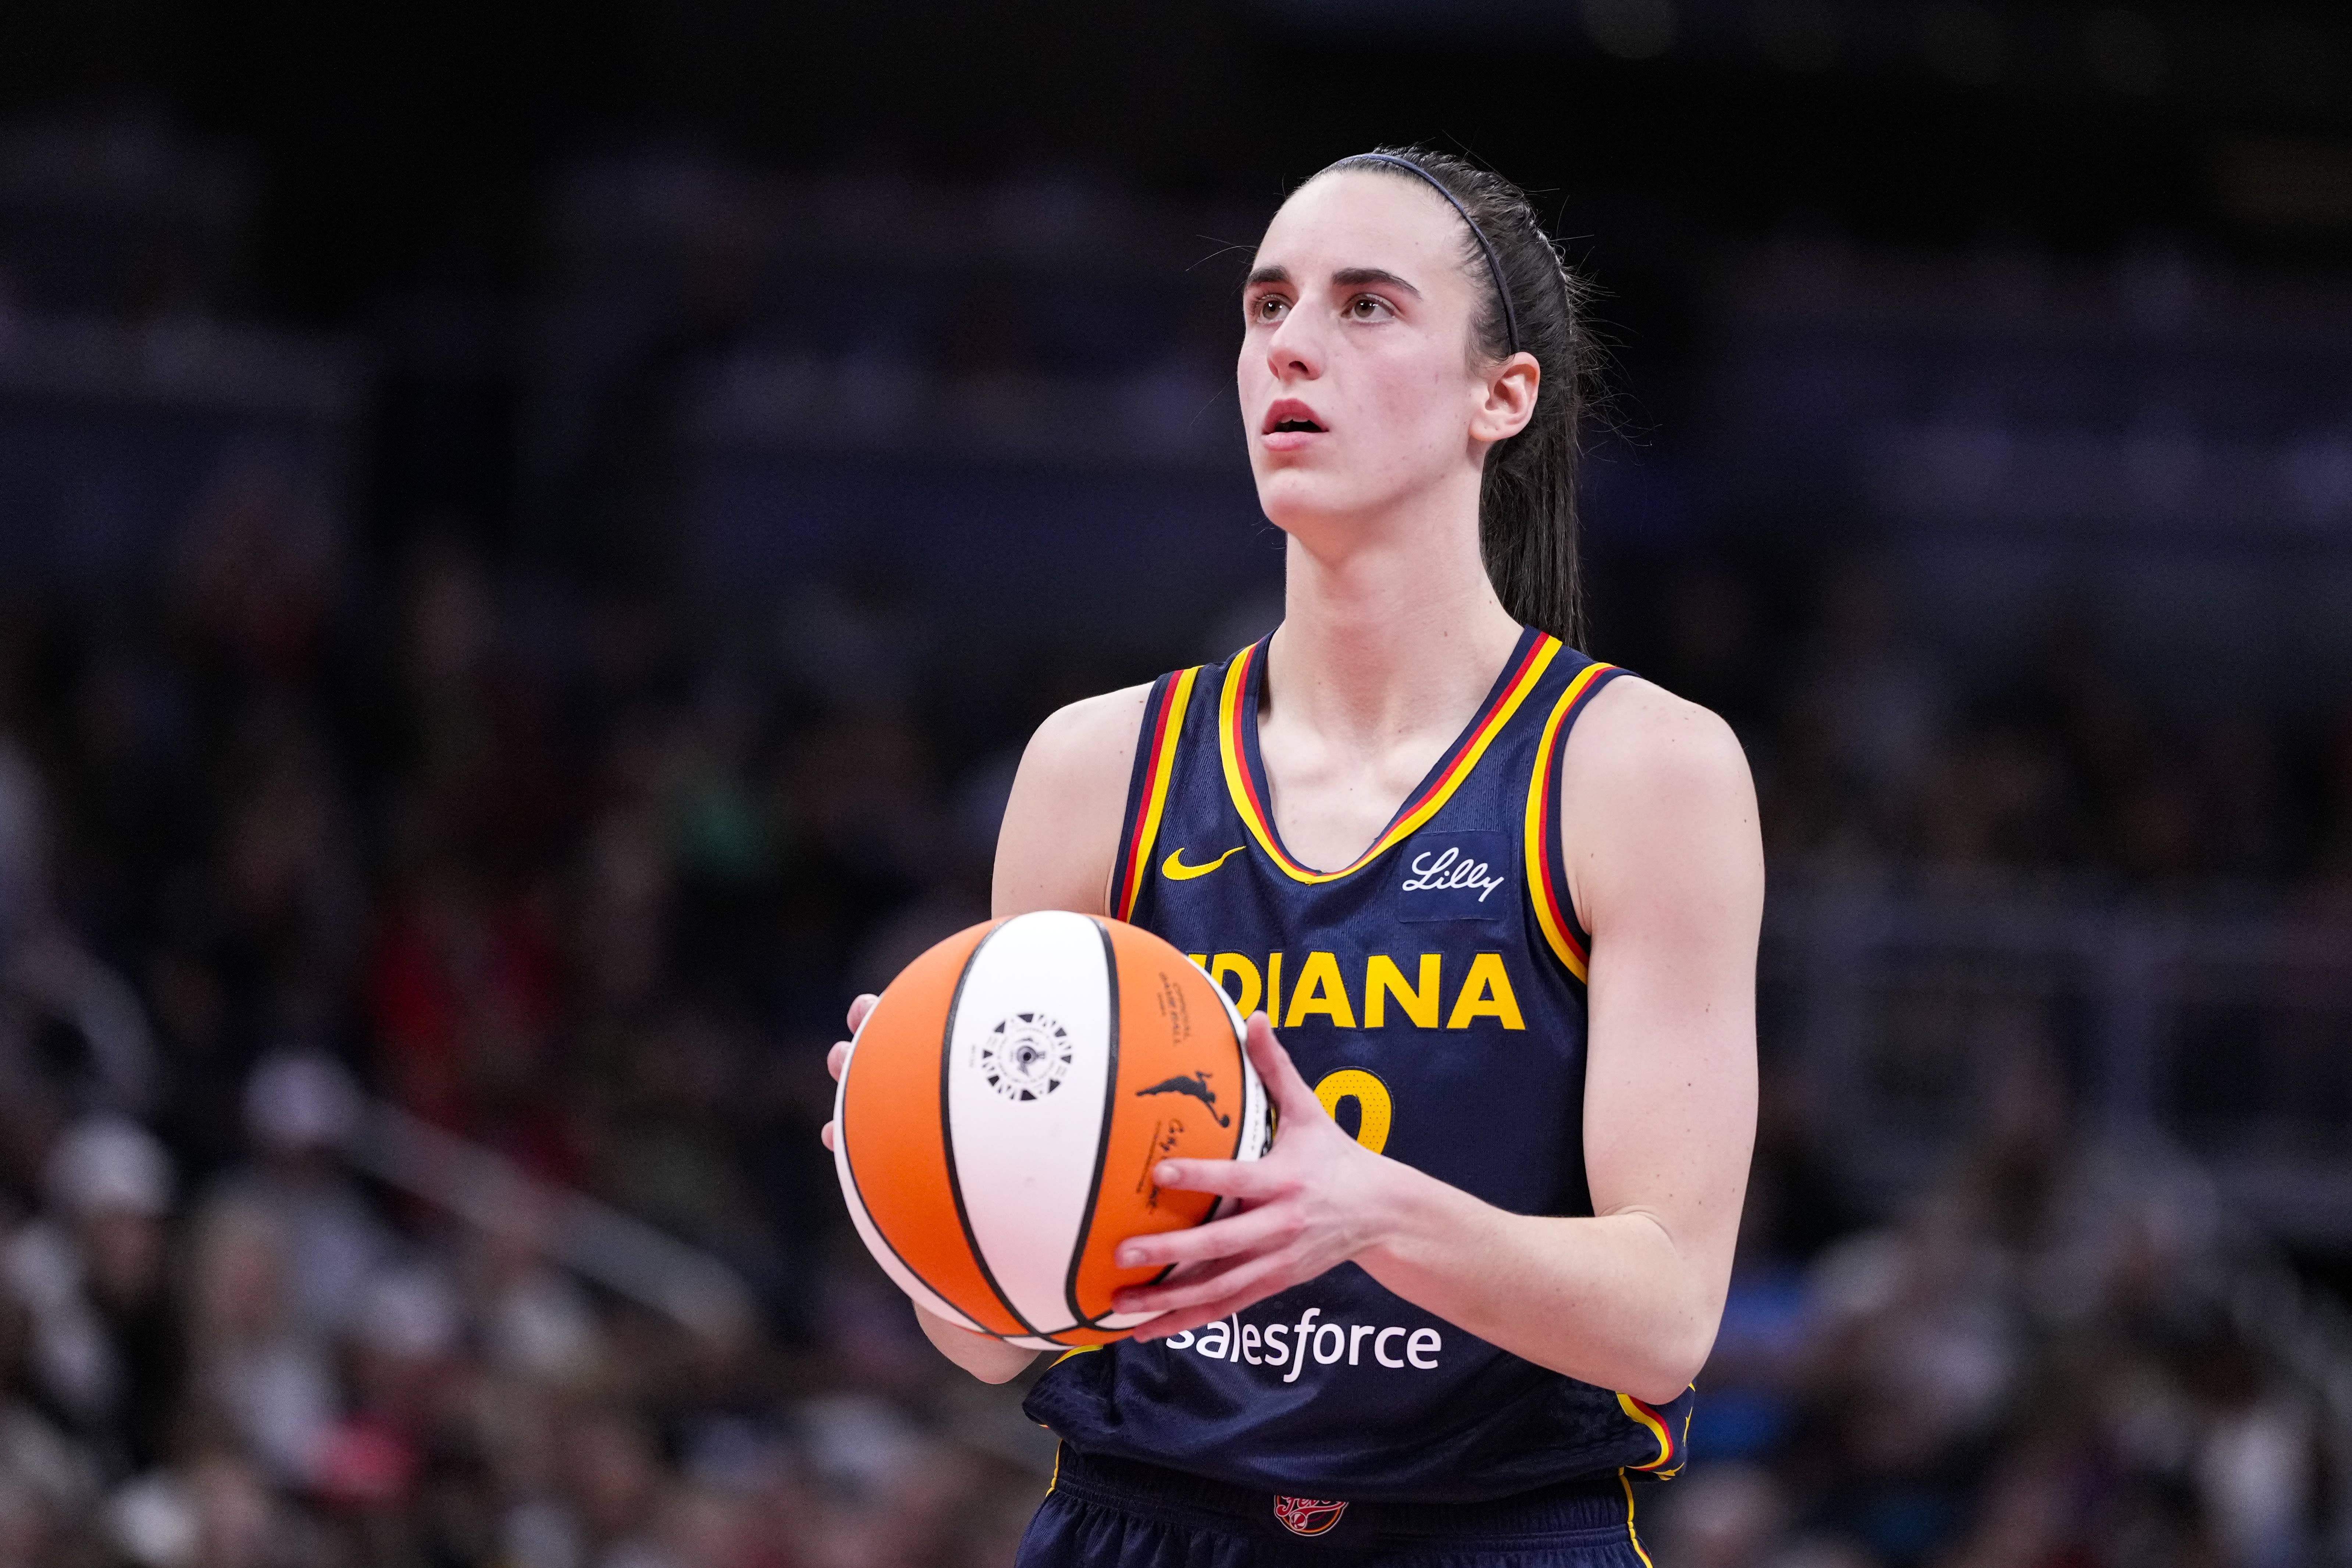 Caitlin Clark's next WNBA game: How to watch the Seattle Storm vs. Indiana Fever tonight